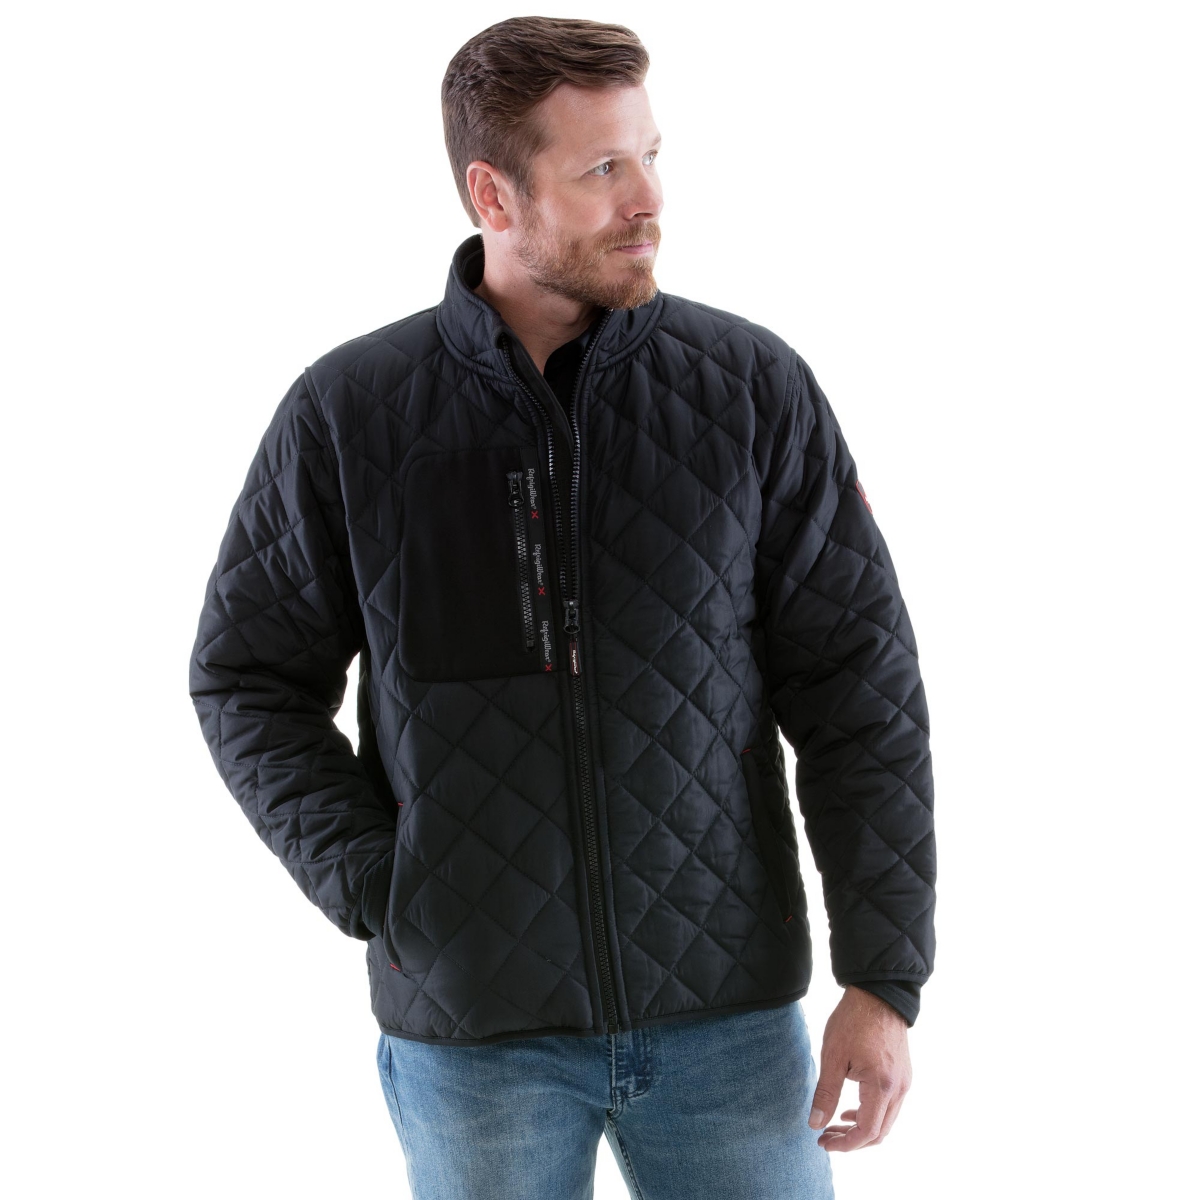 Men's Insulated Diamond Quilted Jacket with Fleece Lined Collar - Black